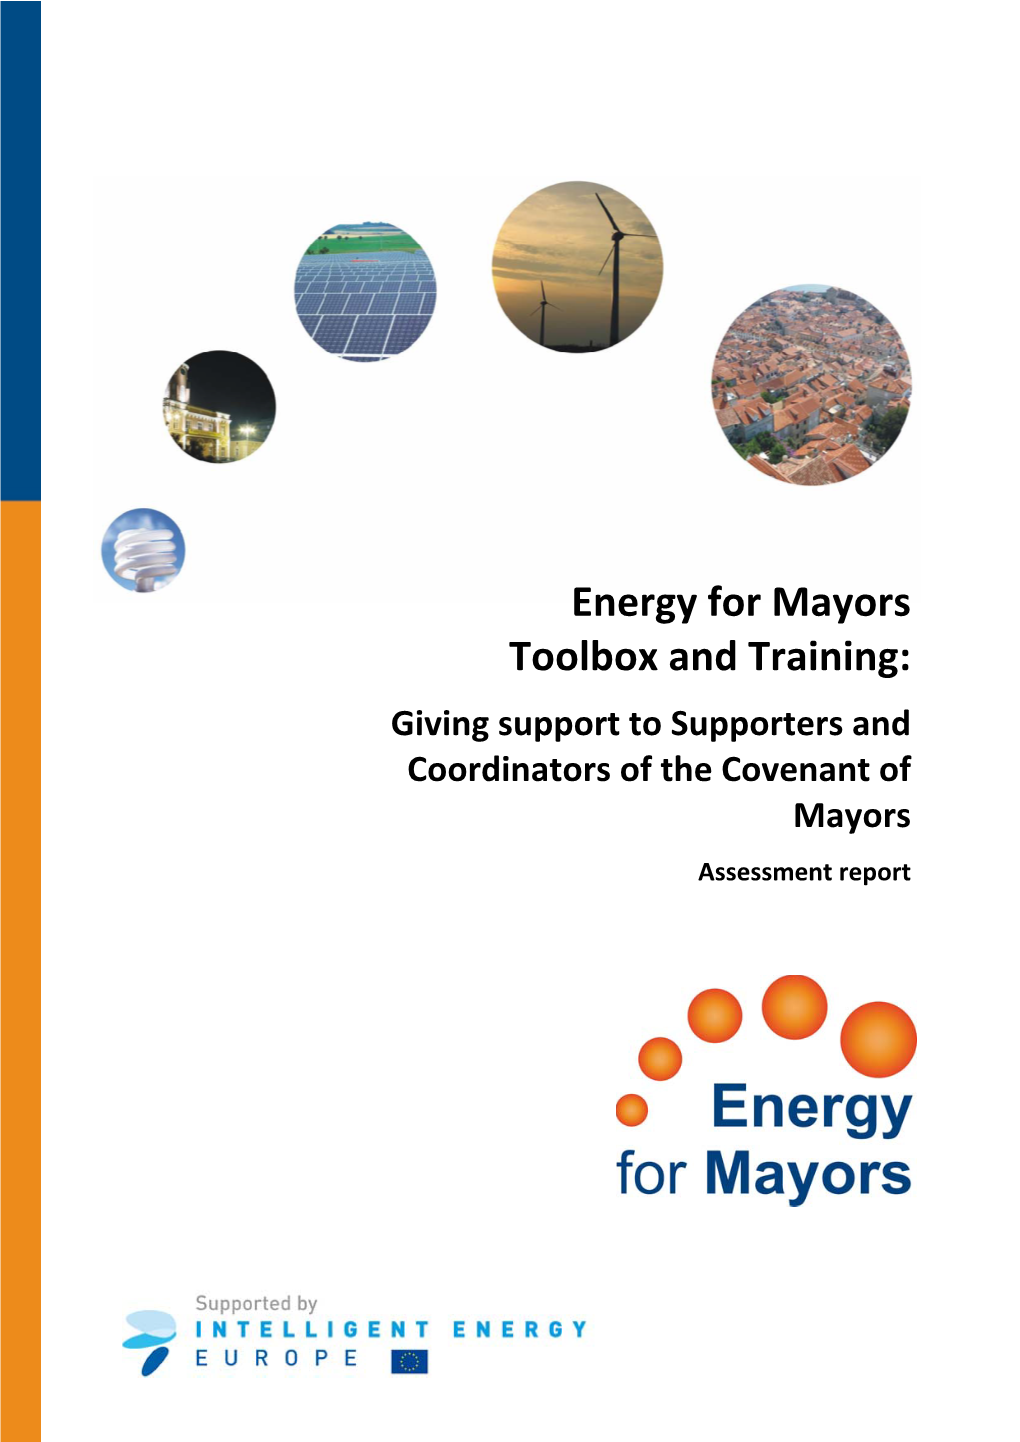 Energy for Mayors Toolbox and Training